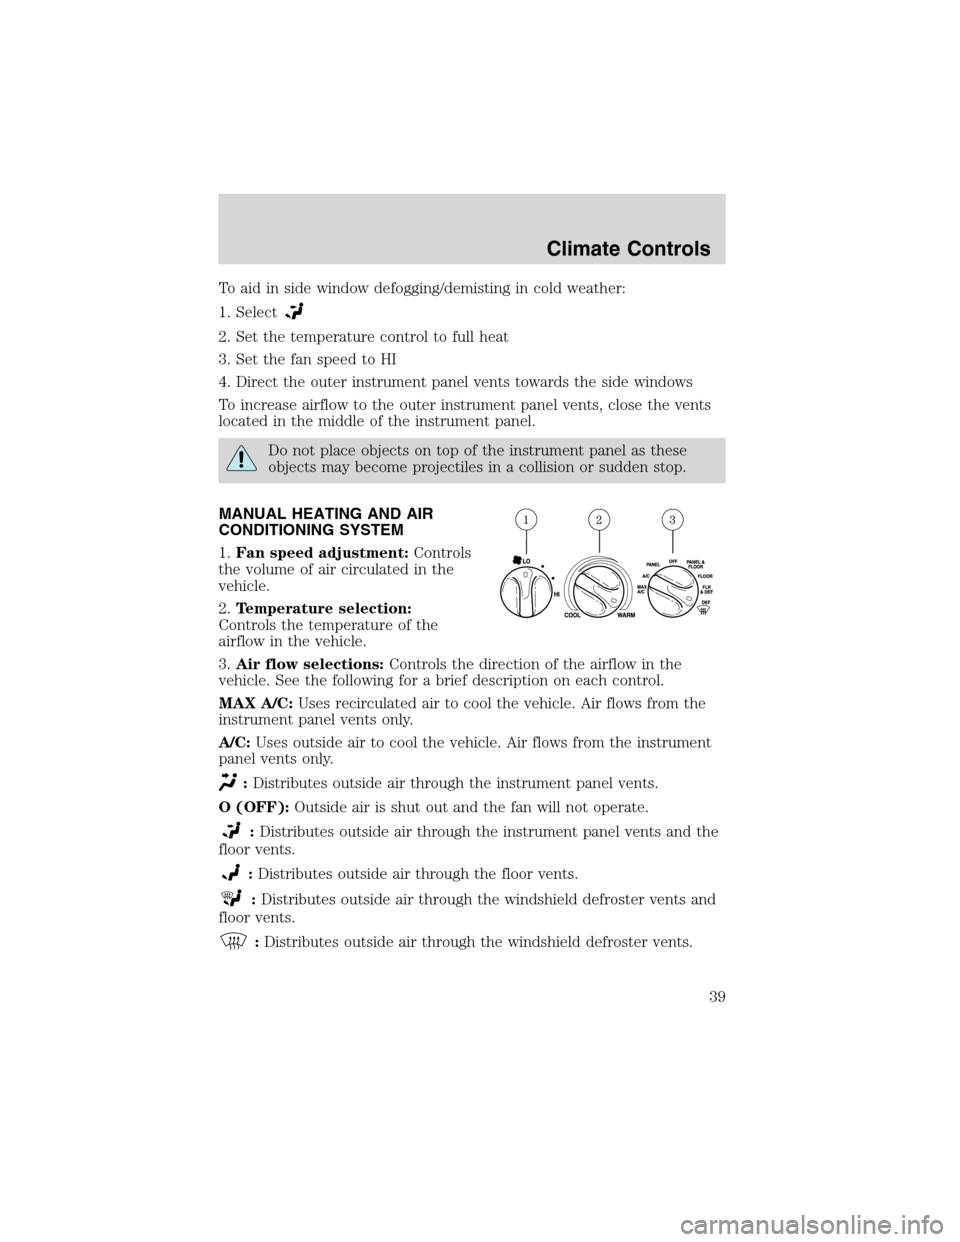 LINCOLN BLACKWOOD 2003  Owners Manual To aid in side window defogging/demisting in cold weather:
1. Select
2. Set the temperature control to full heat
3. Set the fan speed to HI
4. Direct the outer instrument panel vents towards the side 